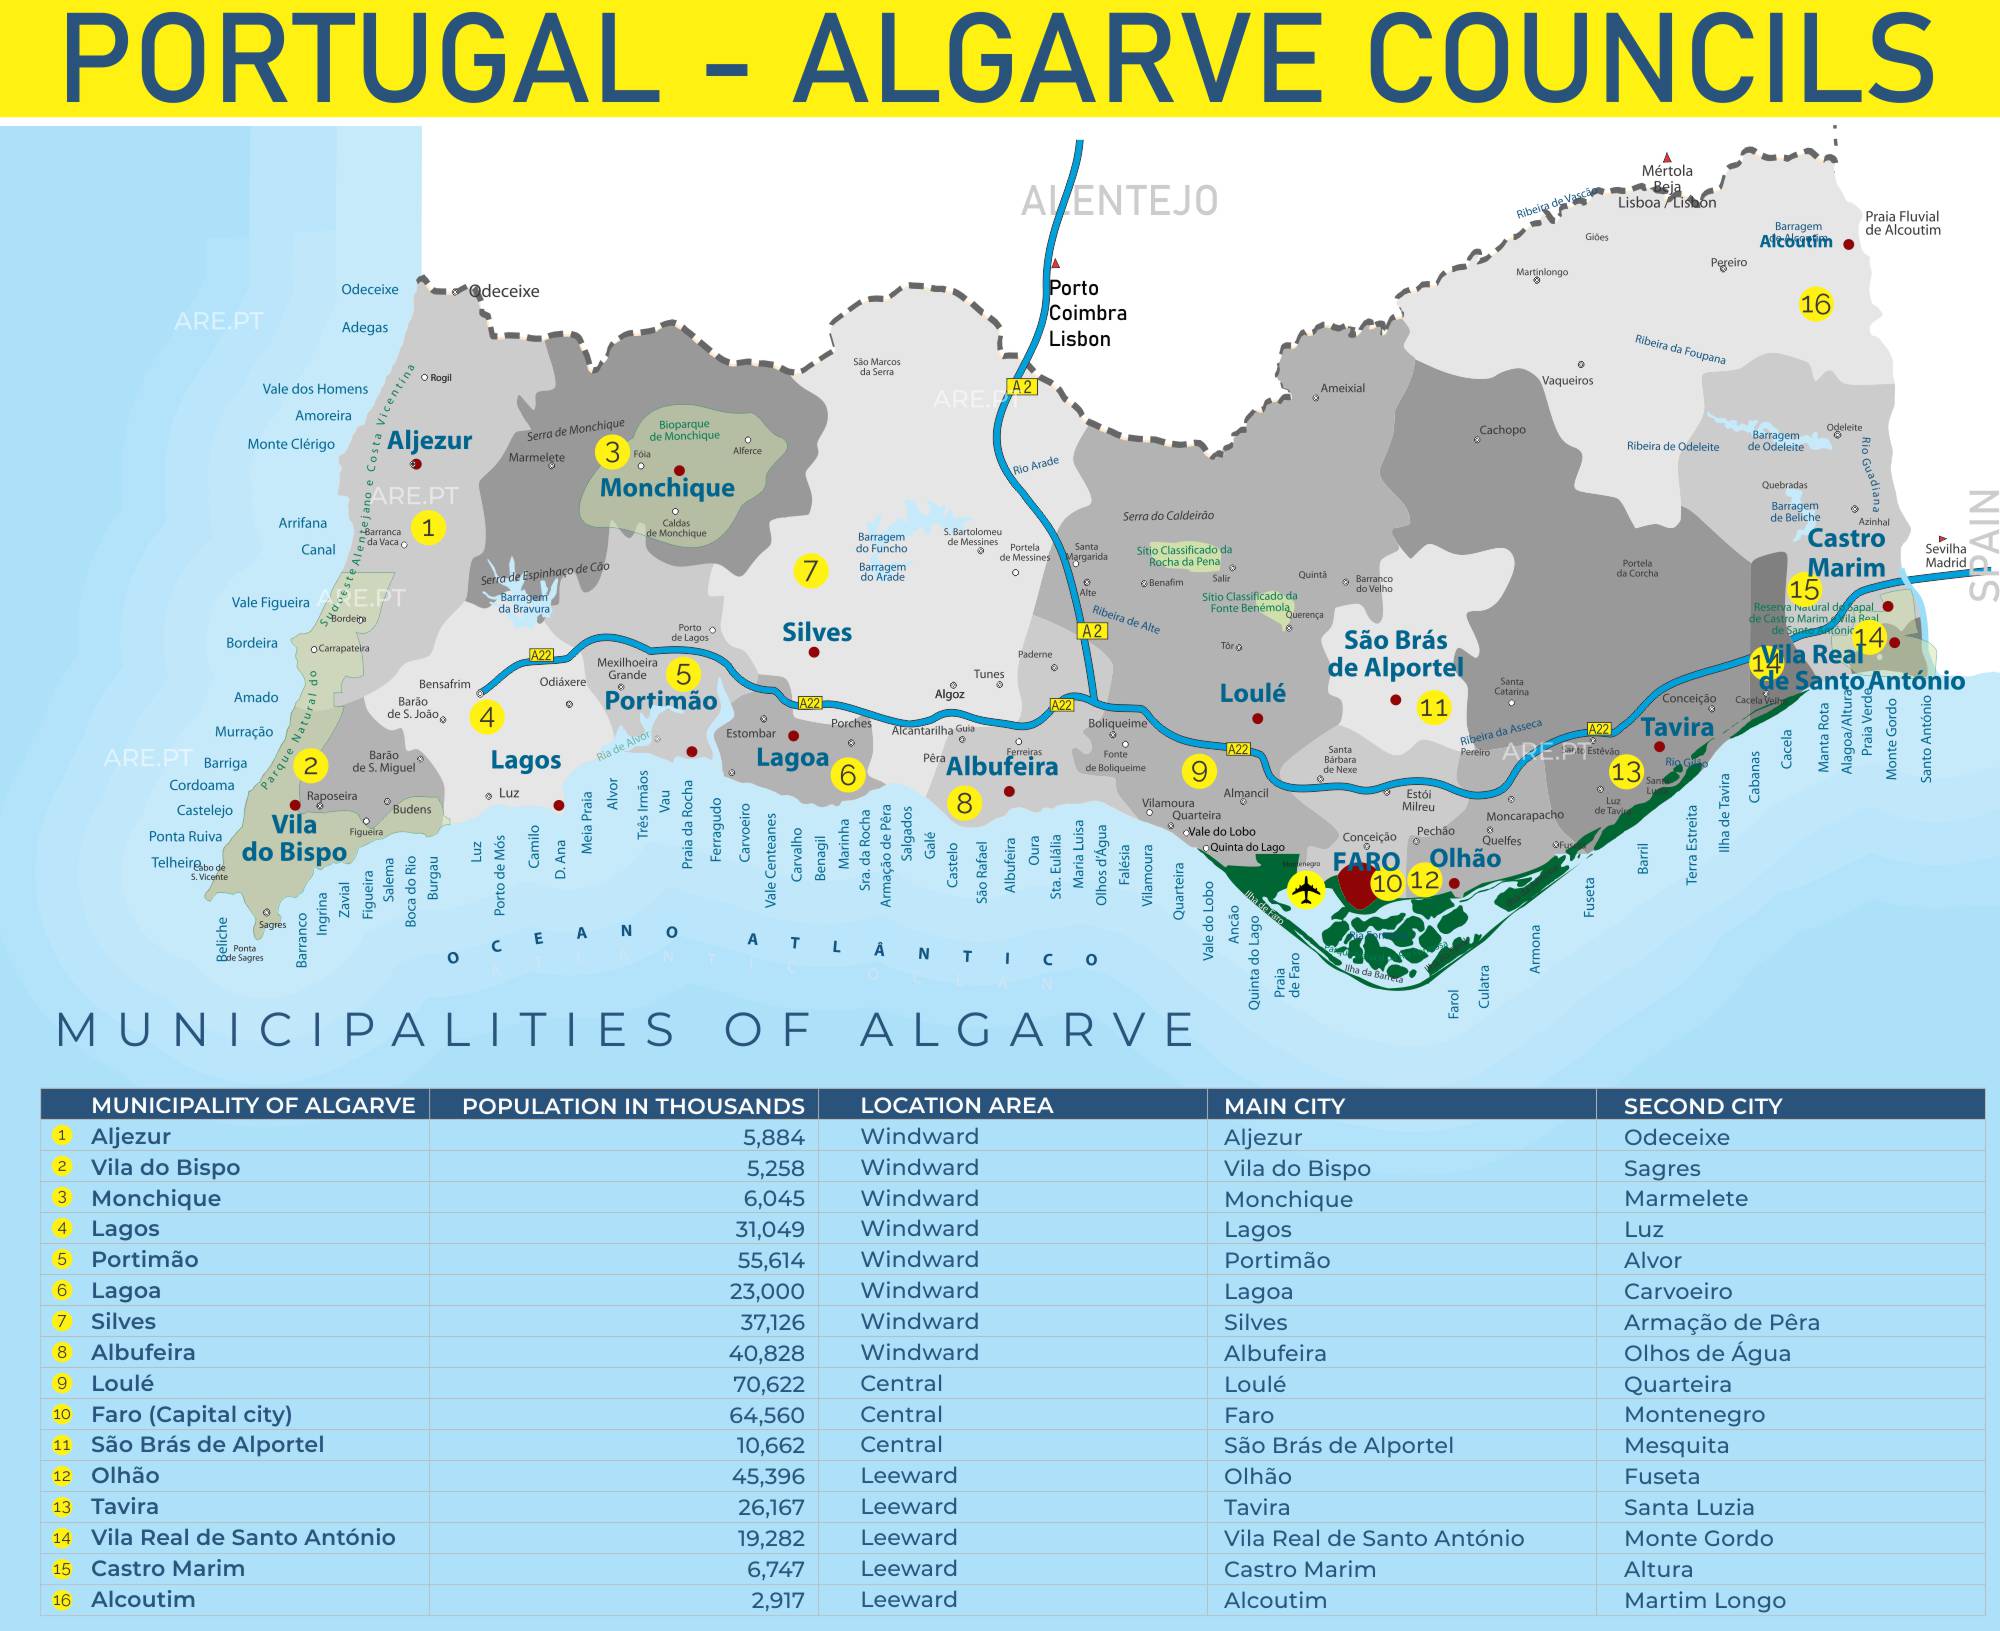 Algarve Cities and Attractions Map